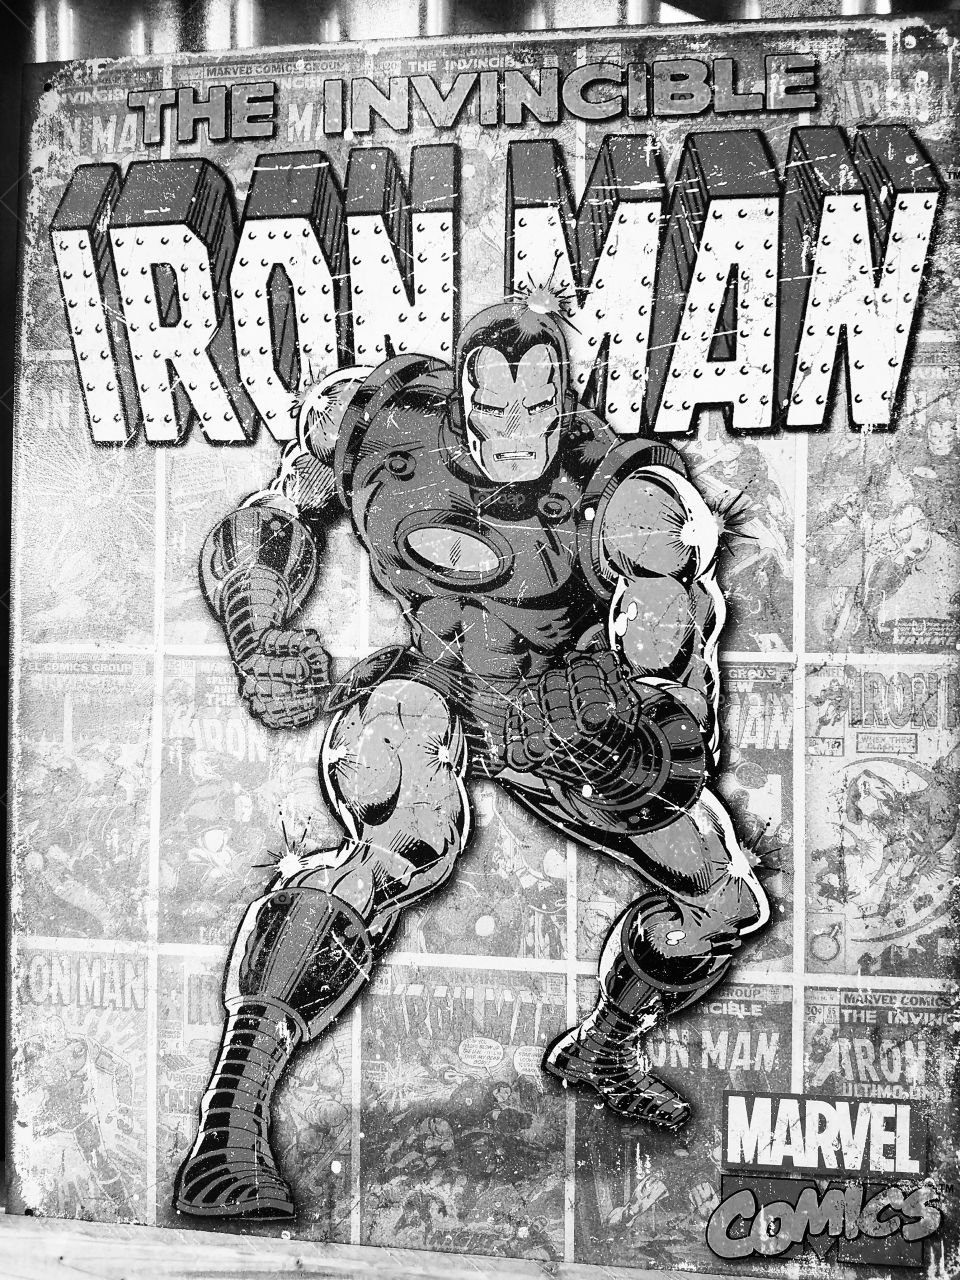 The Invincible Iron Man - Marvel Comics. Black and White poster.